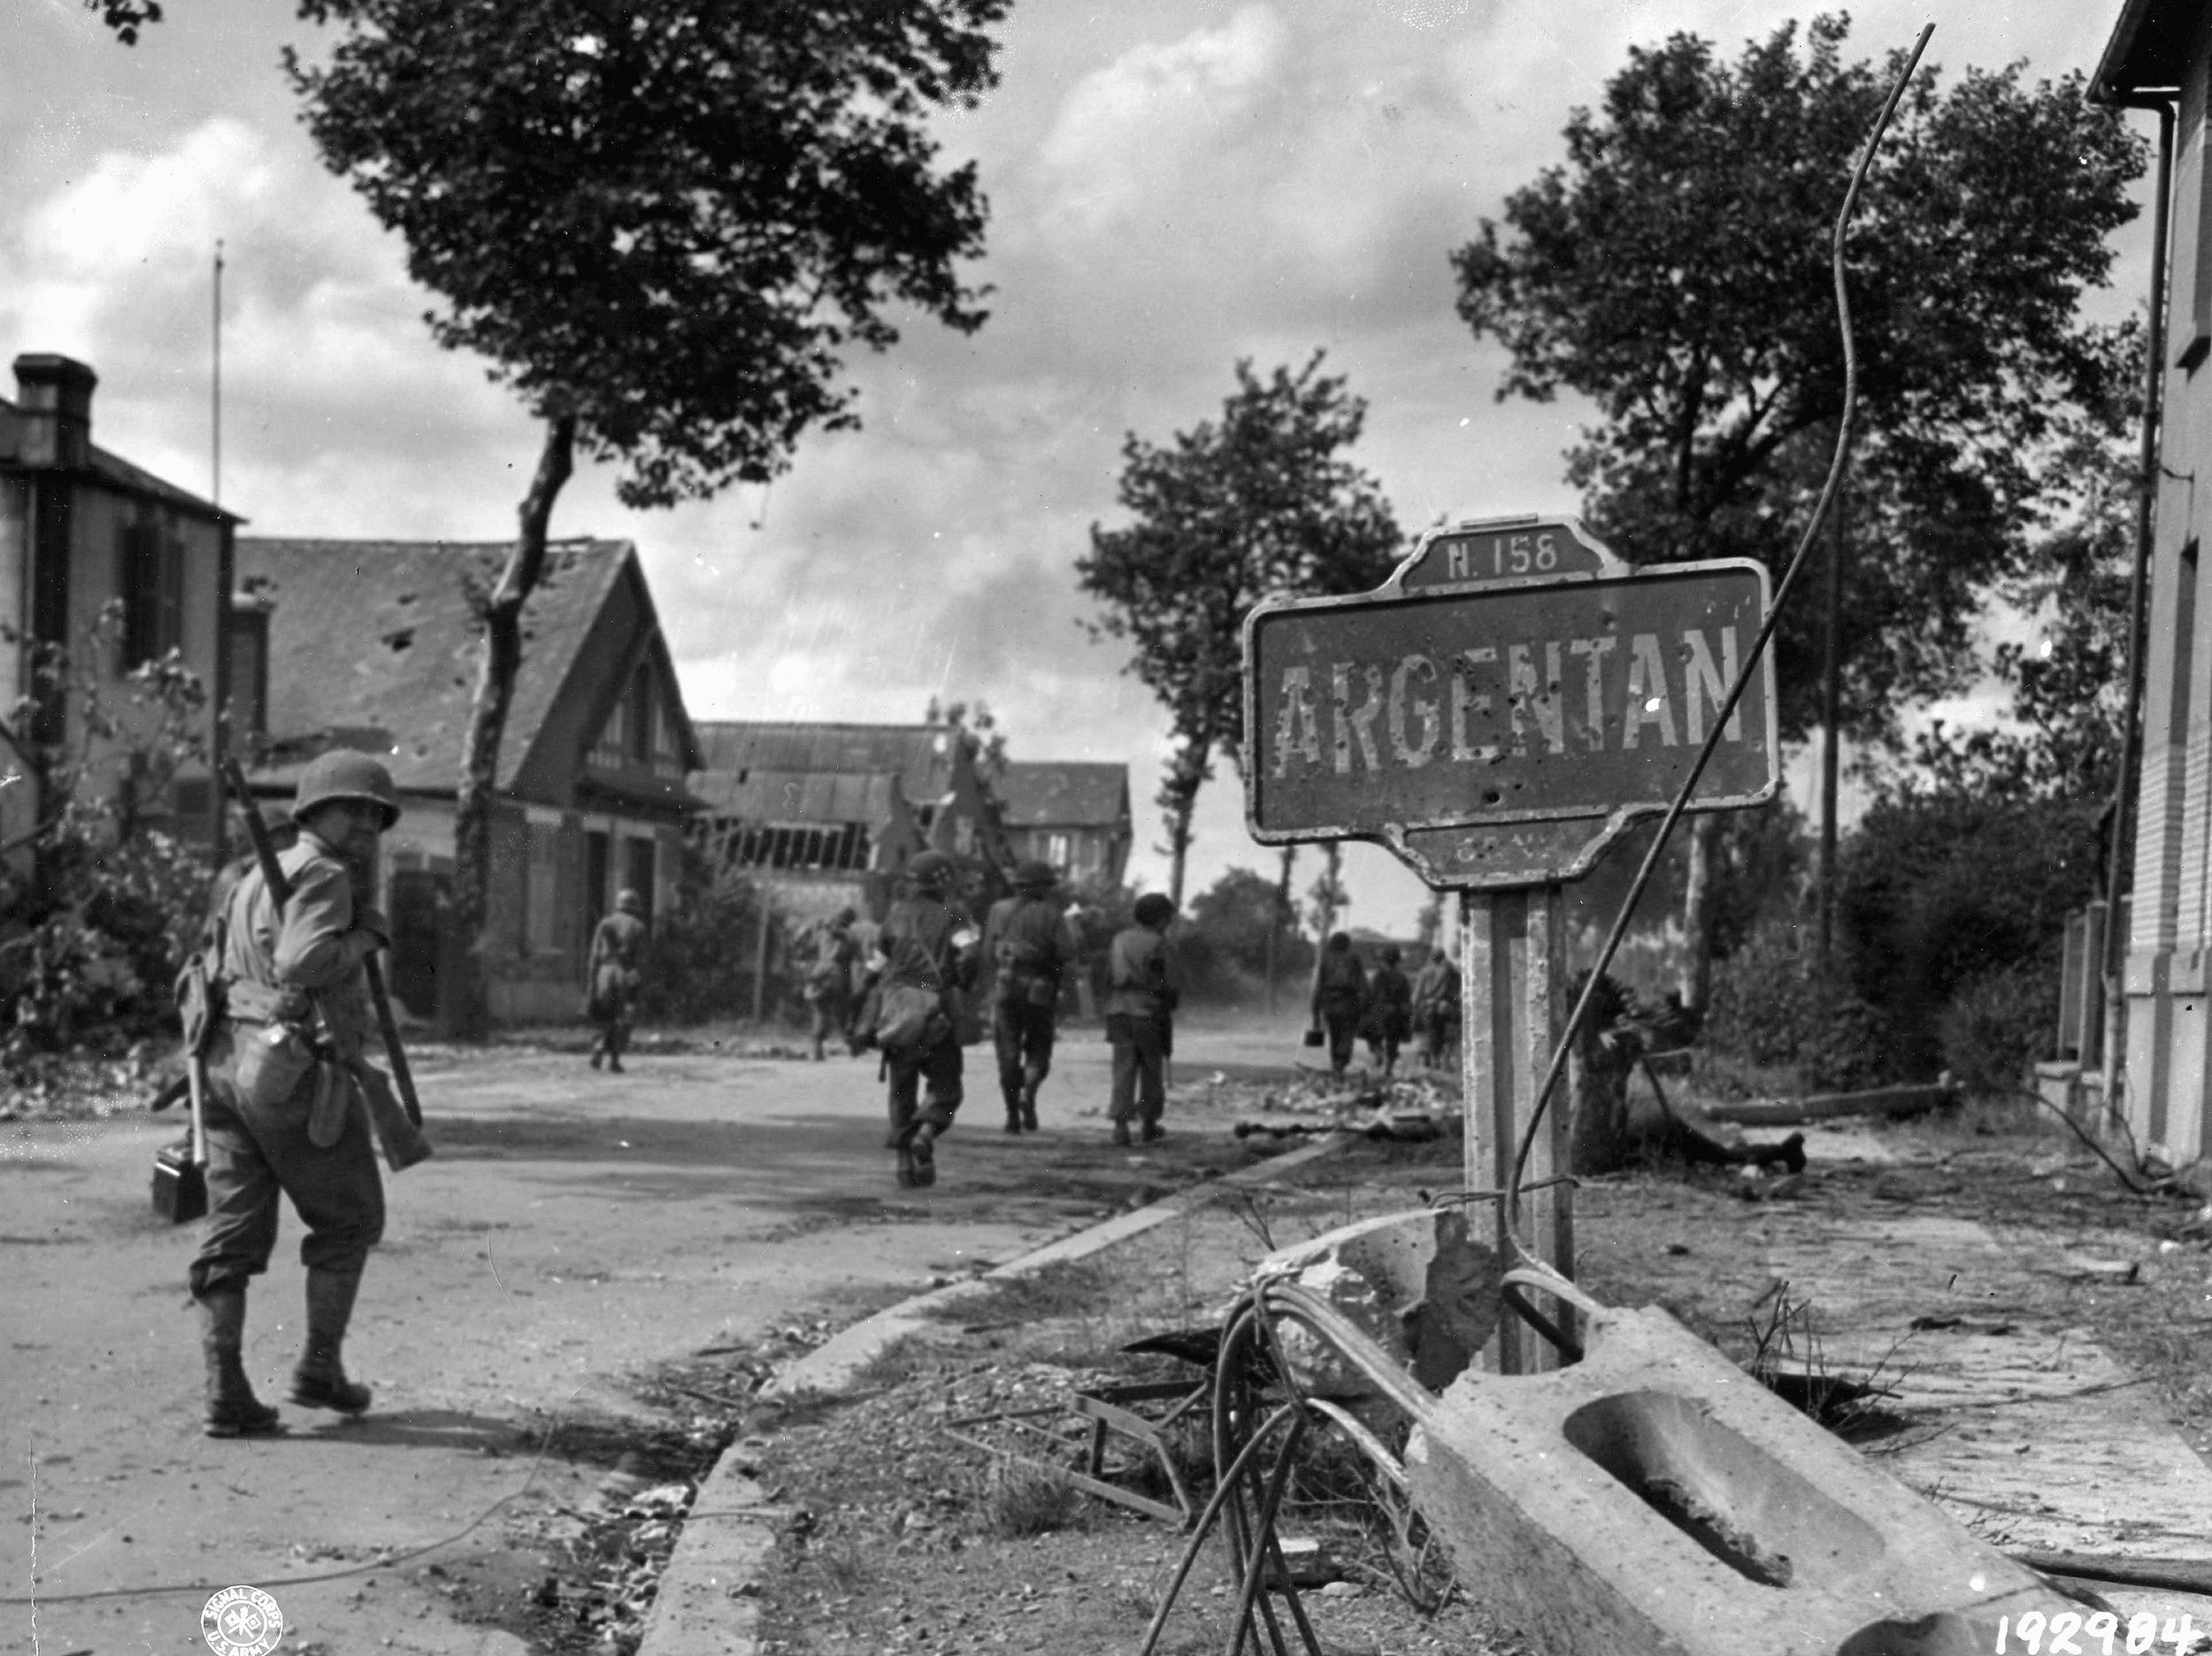 On August 20, 1944, American troops march into Argentan. 